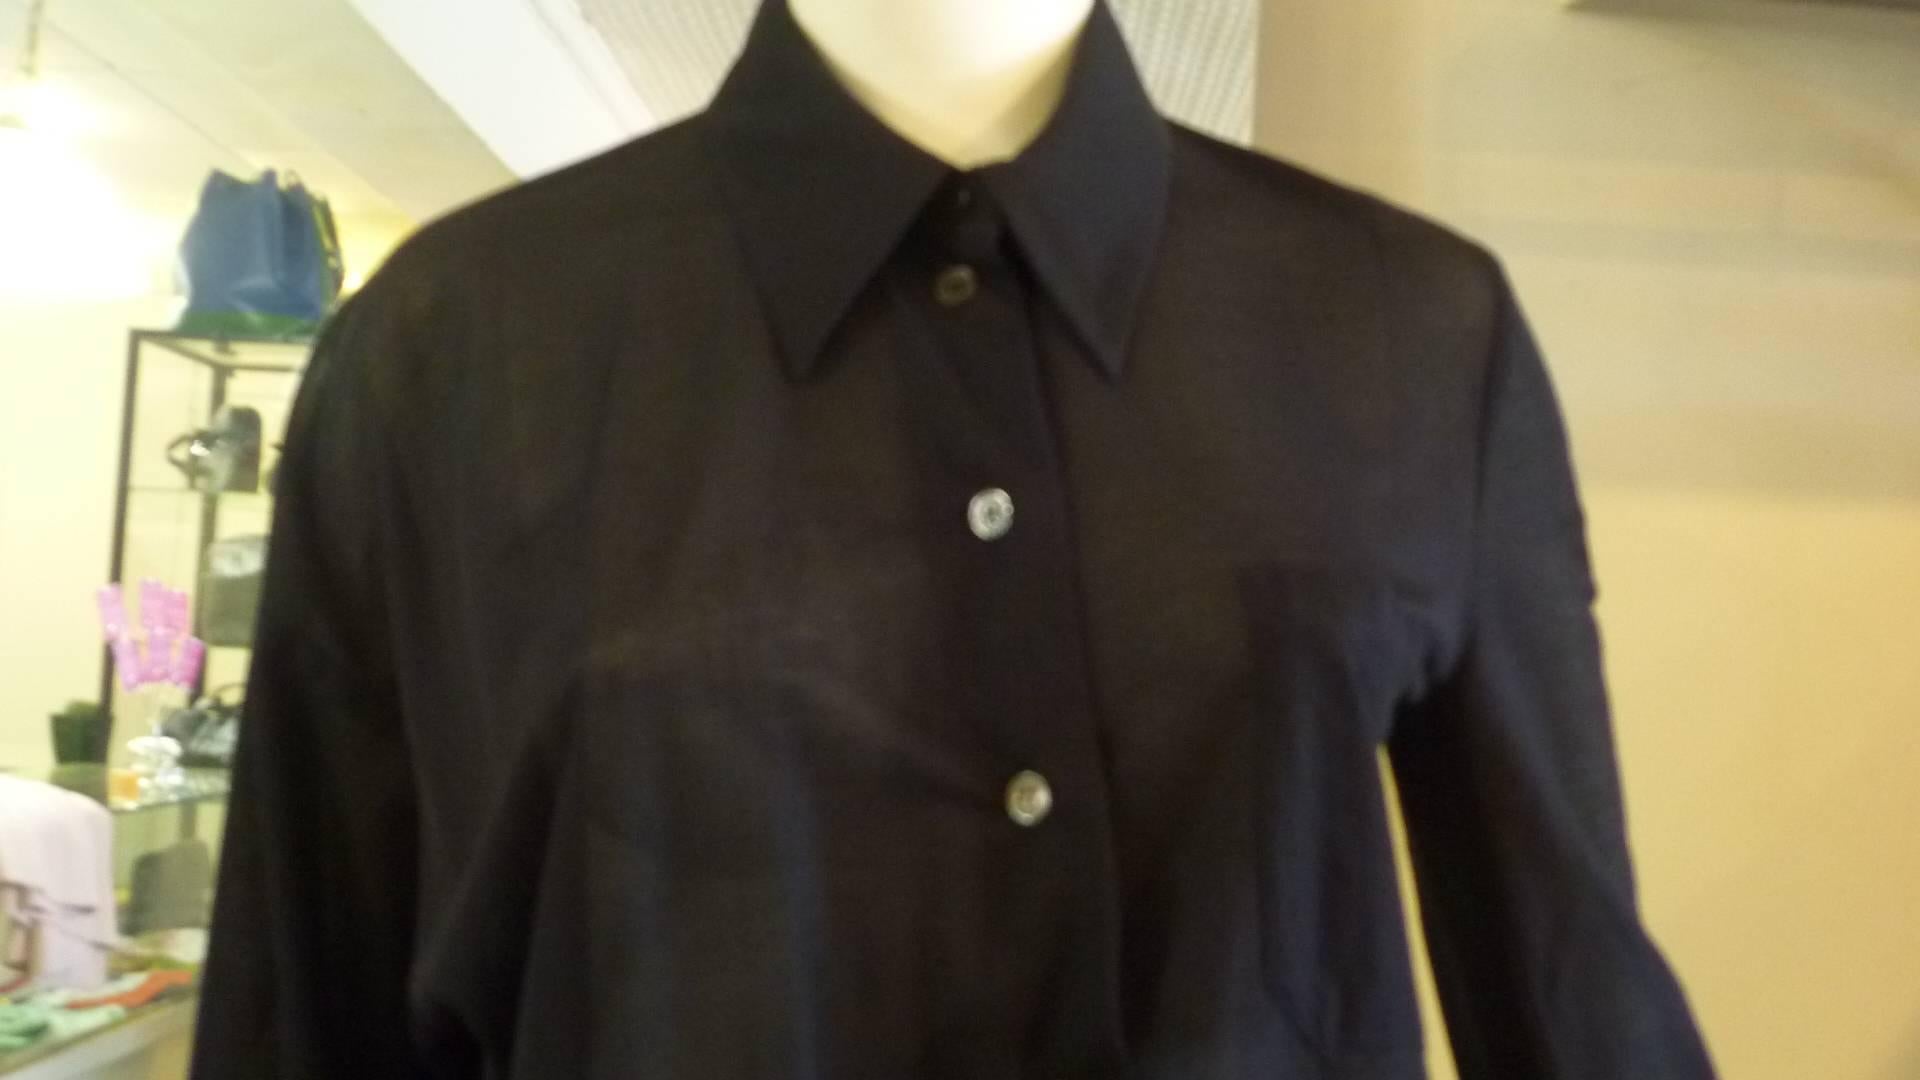 Made of cotton, this assymetrical shirt has internal ties and one shoulder strap which allows for clever draping versatility.

This shirt has a breast pocket and the material is very soft.